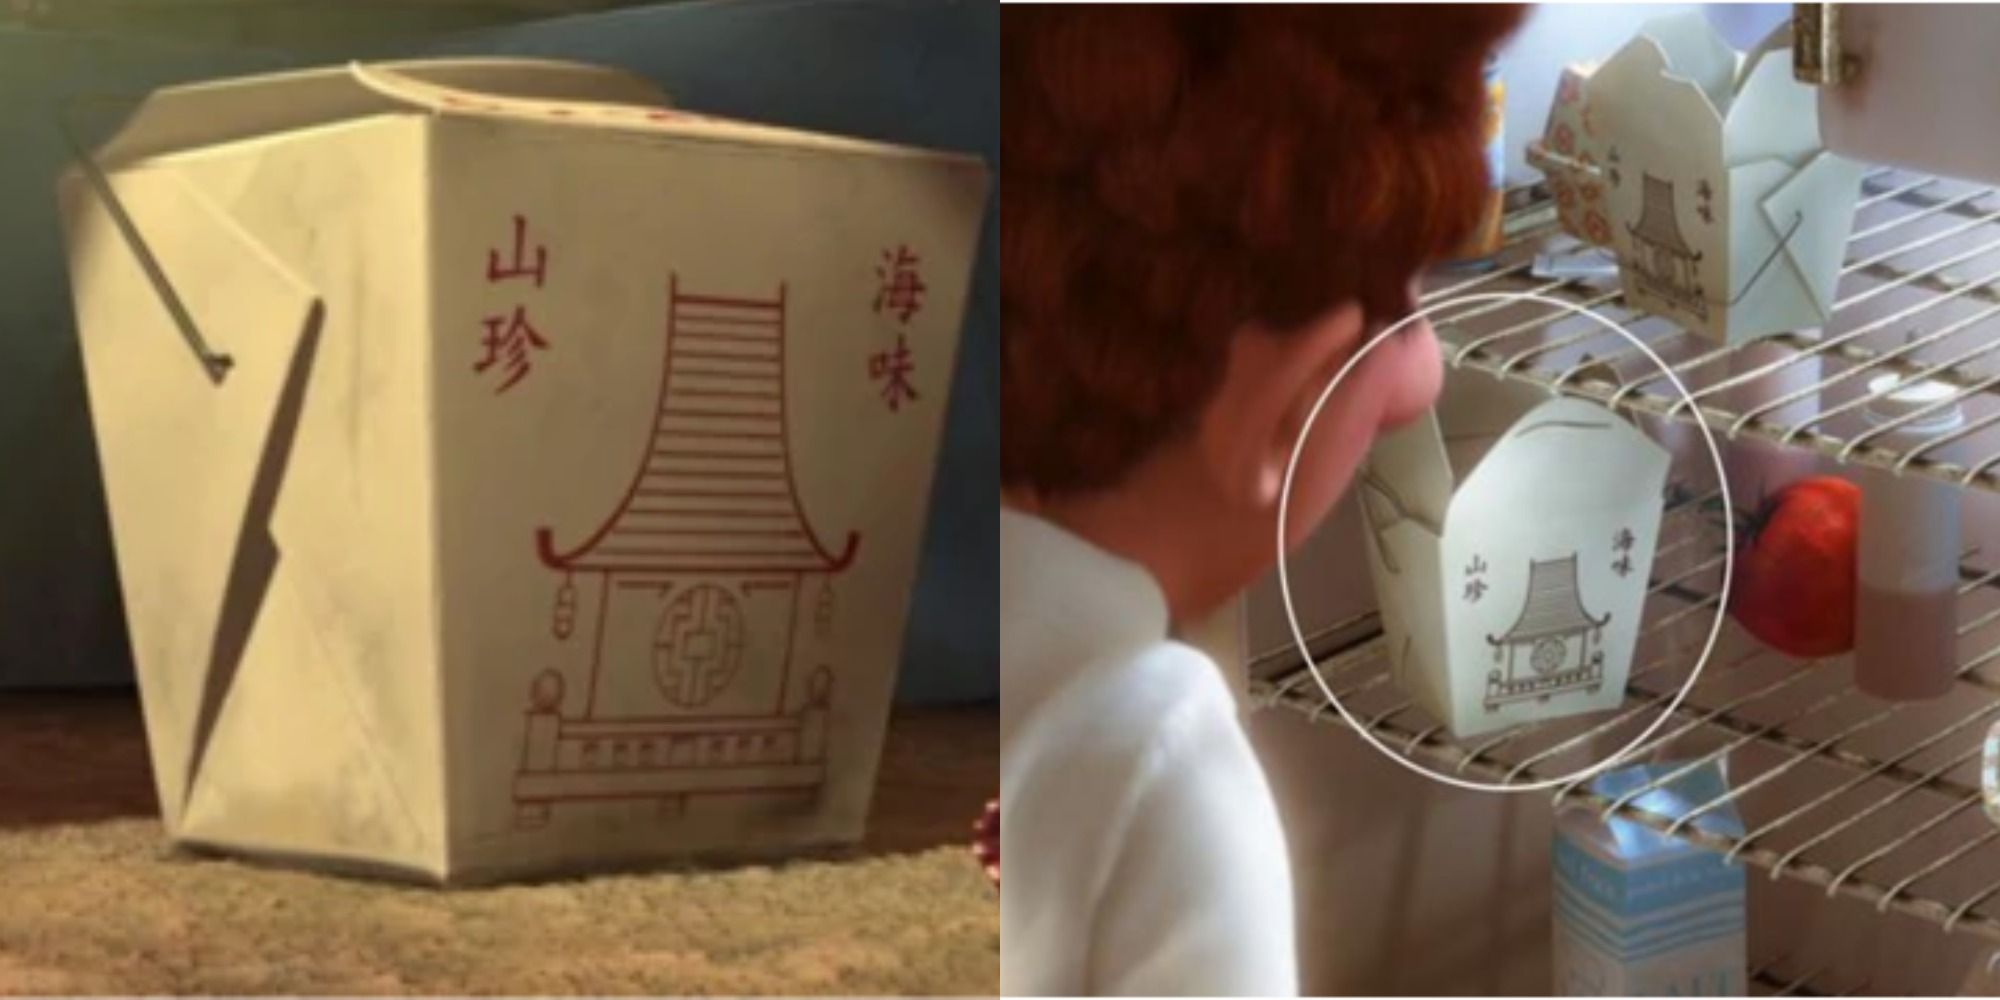 Split images of takeout boxes in Ratatouille.